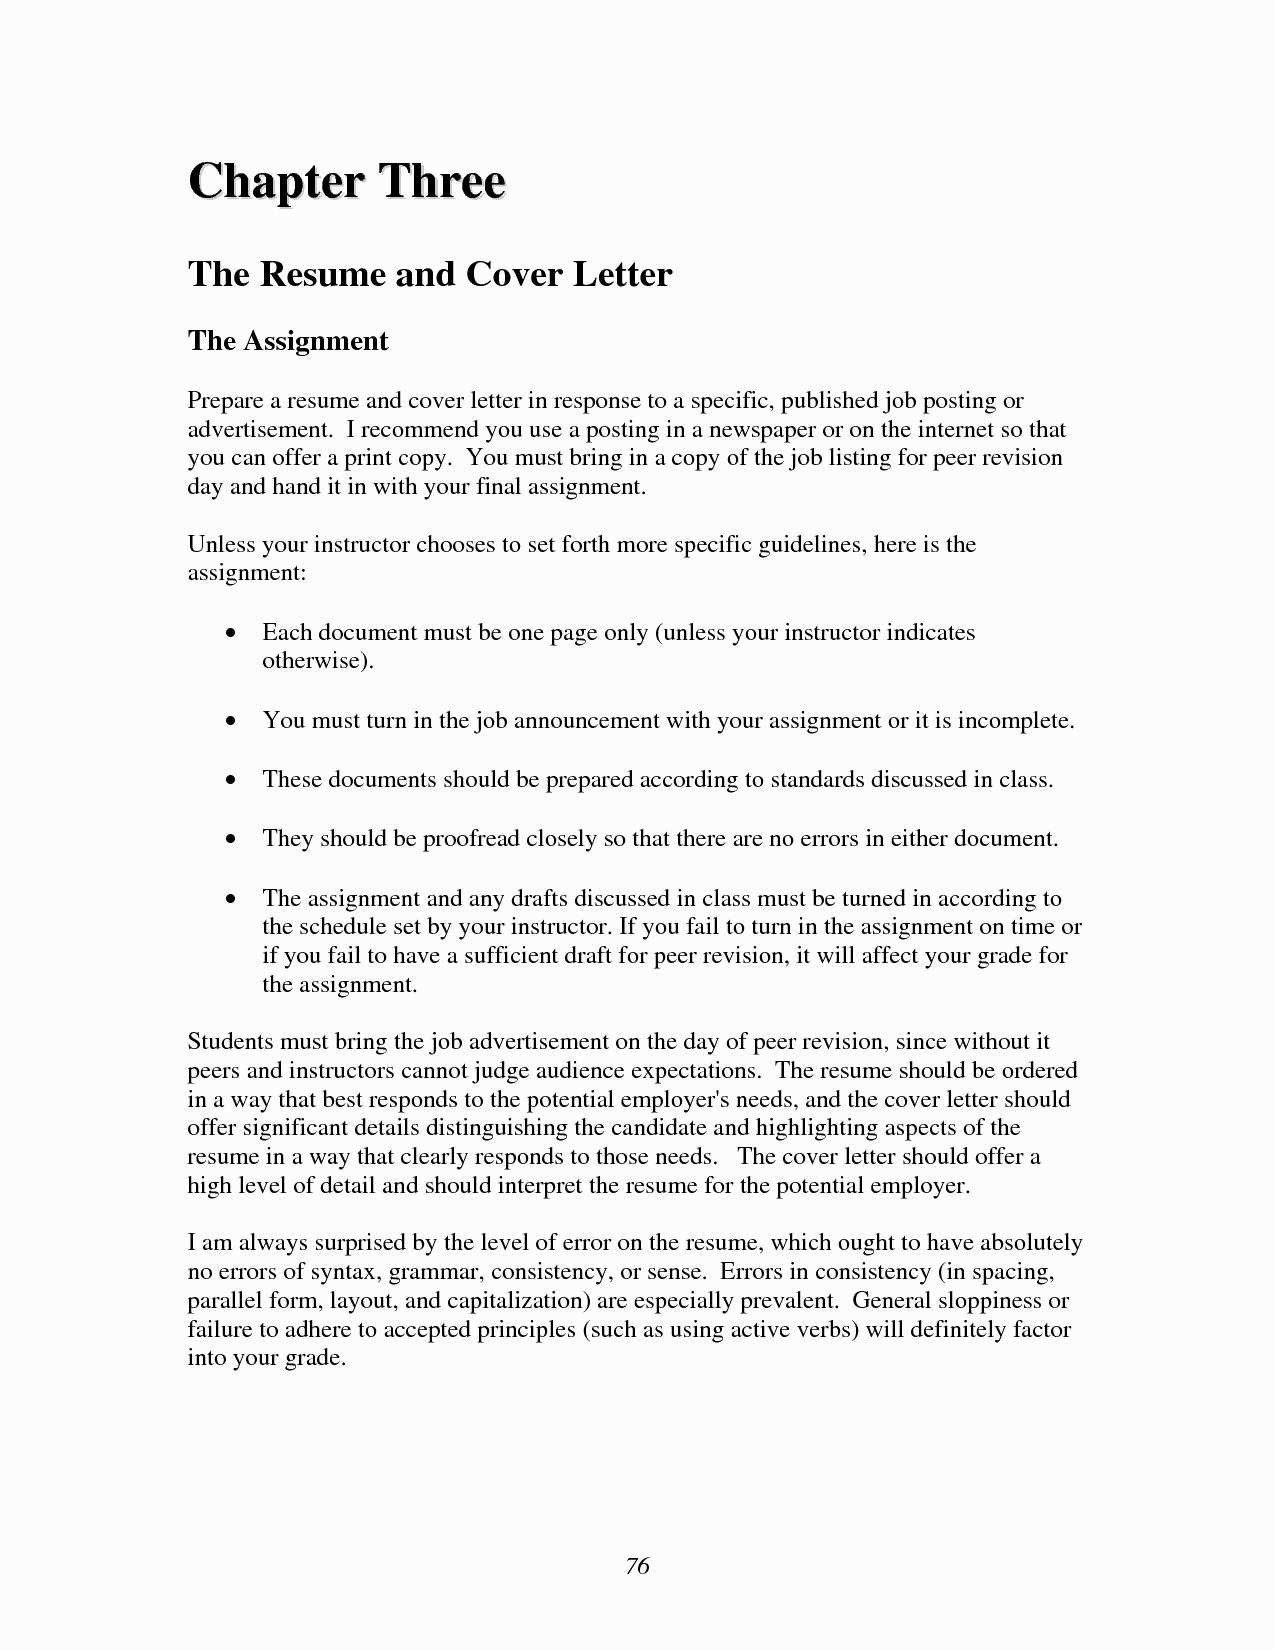 Cover Letter Template for Teenager - Resume and Cover Letter Template Beautiful Fresh Job Fer Letter